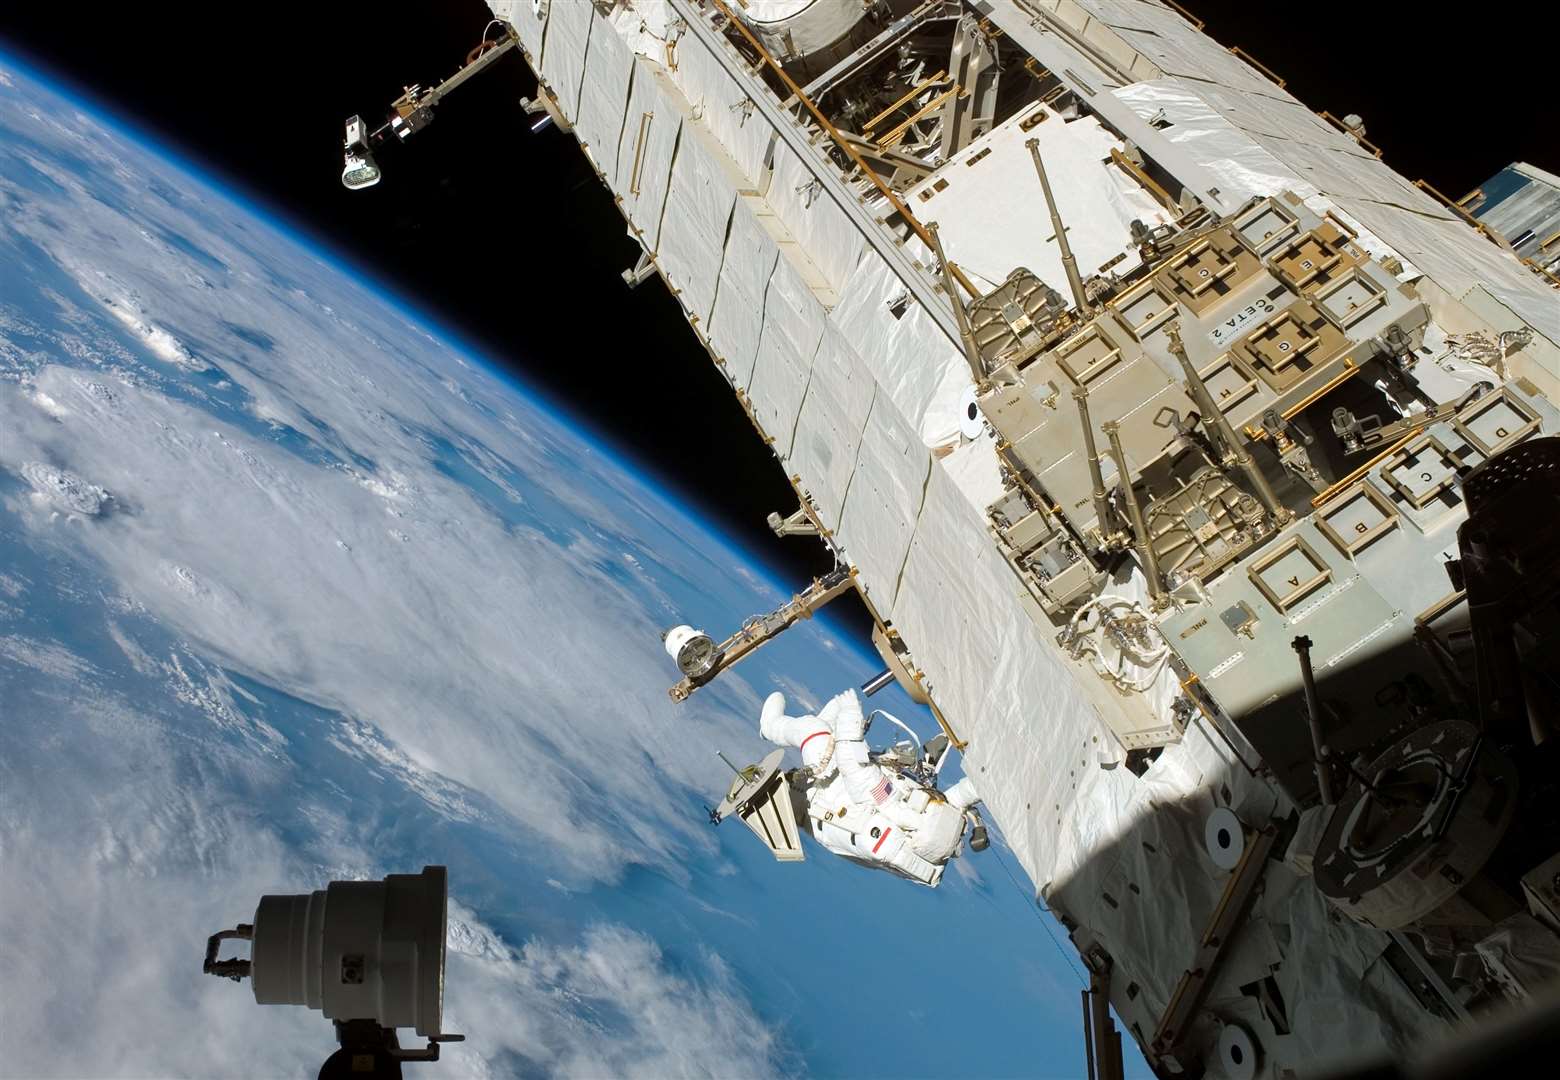 Piers Sellers during one of a number of space-walks he took part in. Picture: Nasa